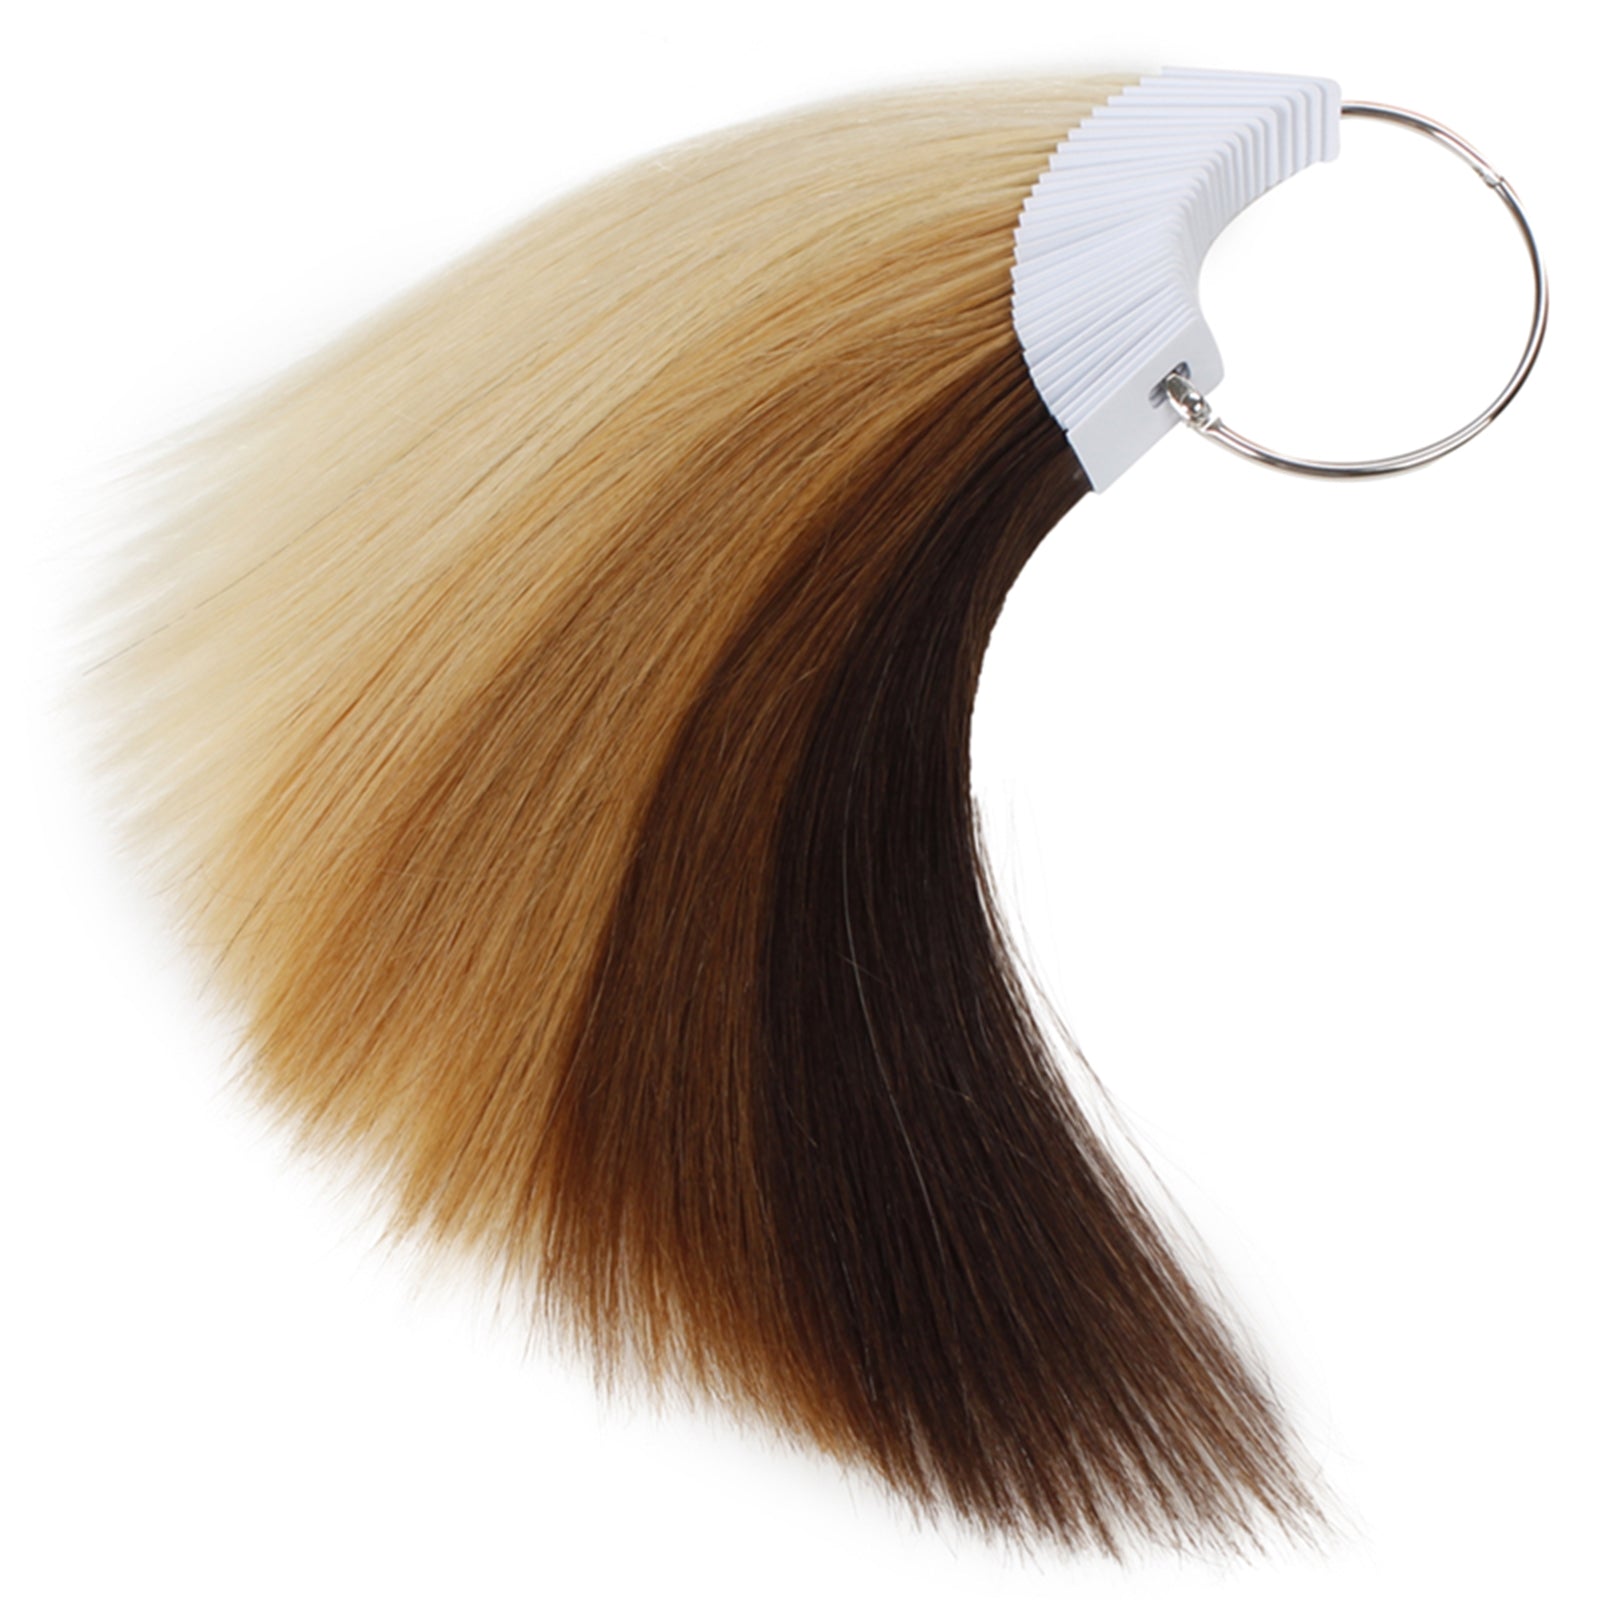 Felek 30/pack Hair Swatches for Testing Color Human Hair Color Rings  Testing Fashion Colors Samples for Salon Hair Color Chart (8 inch, Natural  Black)